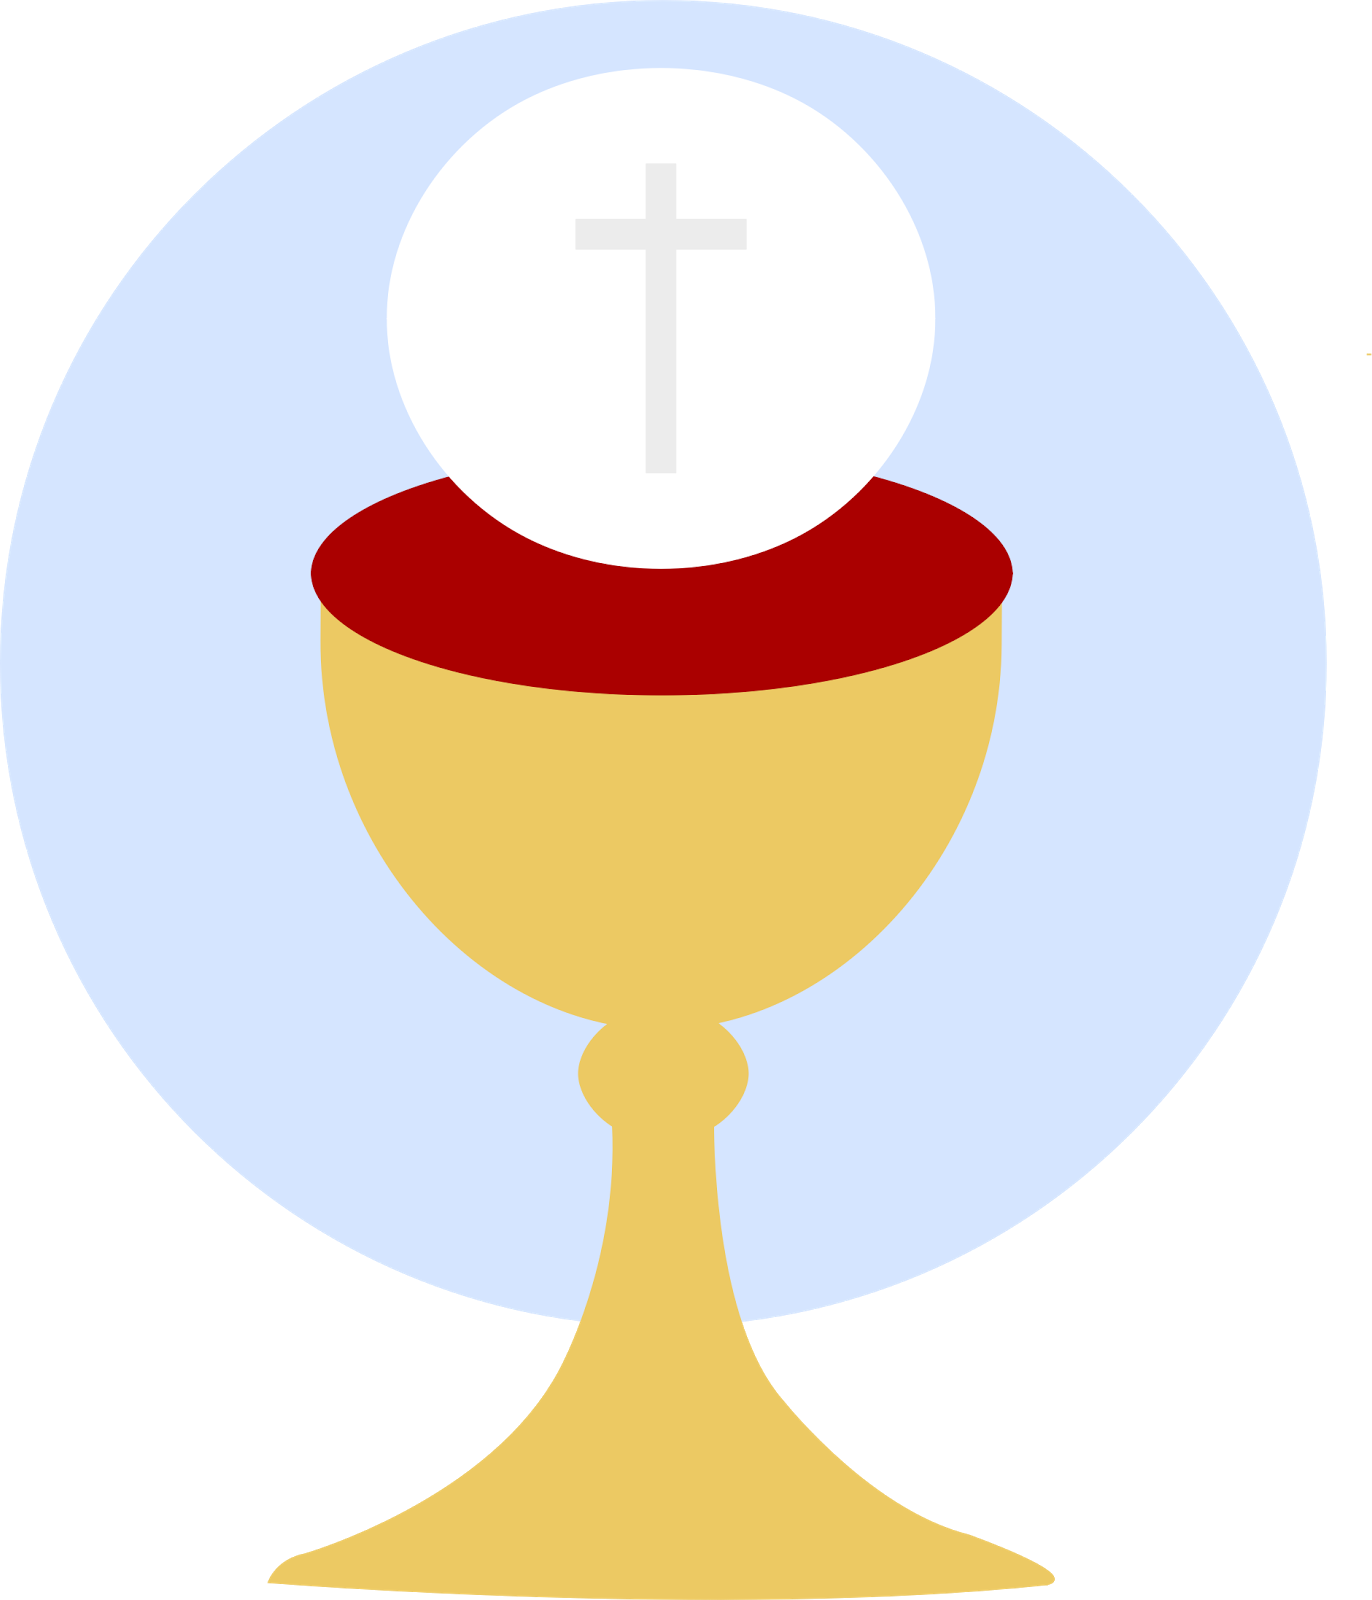 [Image] Available At: Http://2.bp.blogspot Pluspng.com/ Hsxwwhut1Z4/vavtlxrezgi/aaaaaaaable/pgbq3Hibuek/s1600/ Host Over Chalice The Body And Blood Of Jesus.png Hdpng.com  - Chalice And Host, Transparent background PNG HD thumbnail